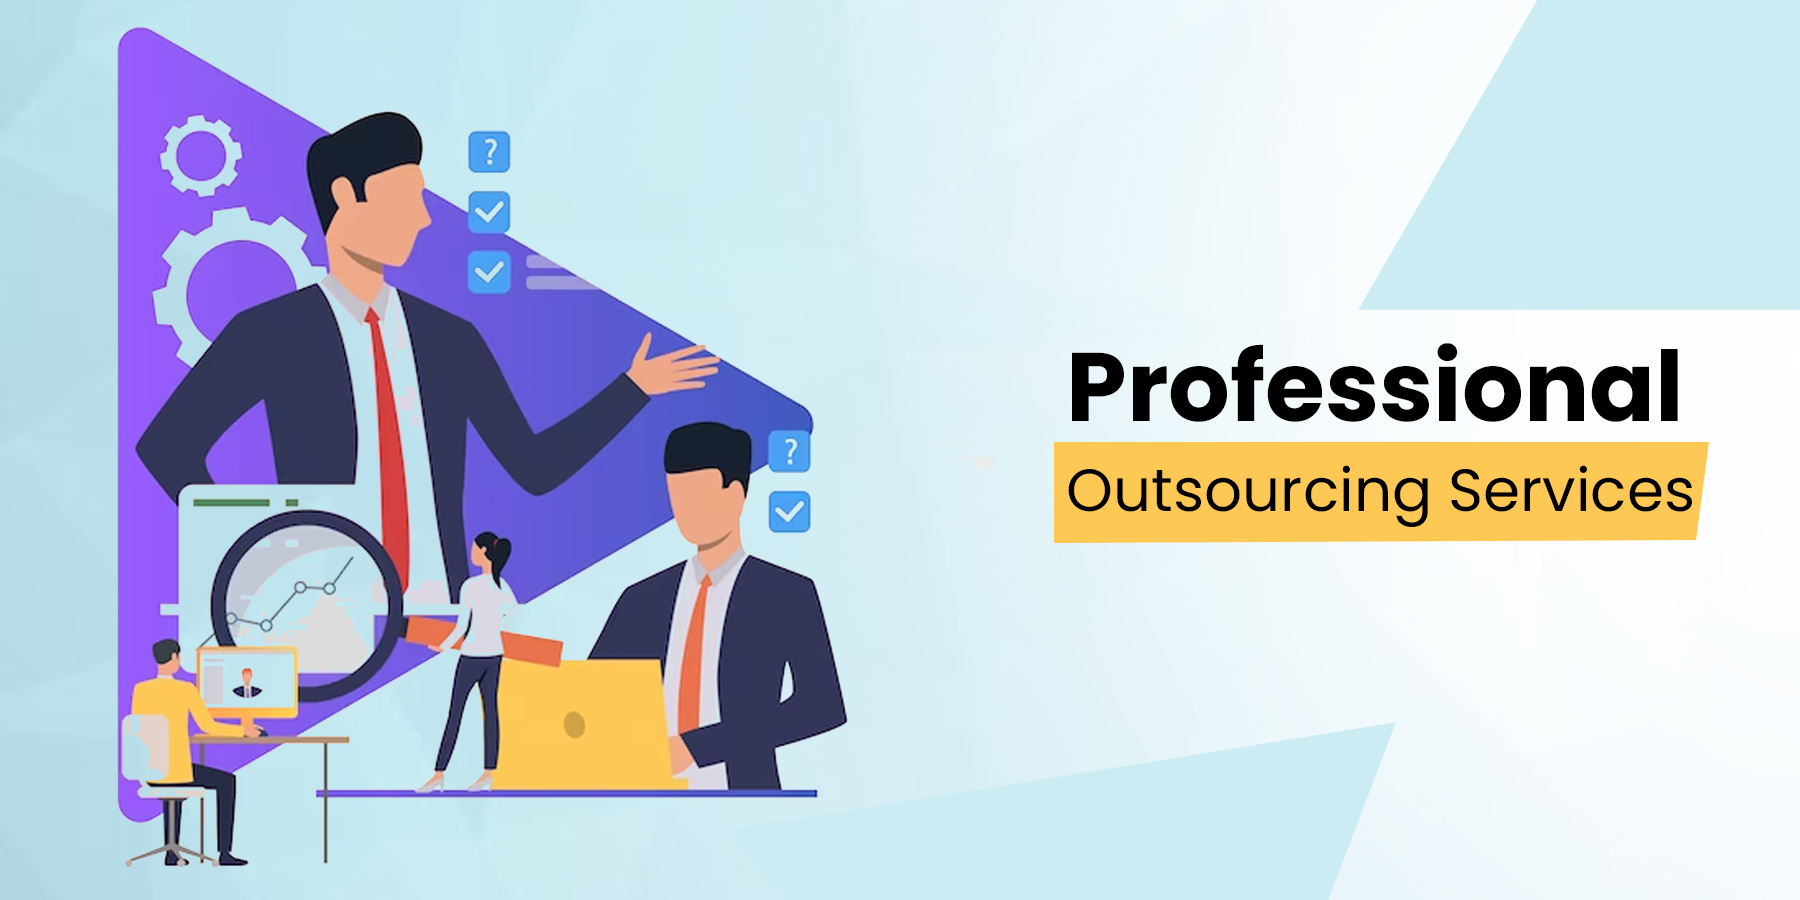 Professional Outsourcing Services